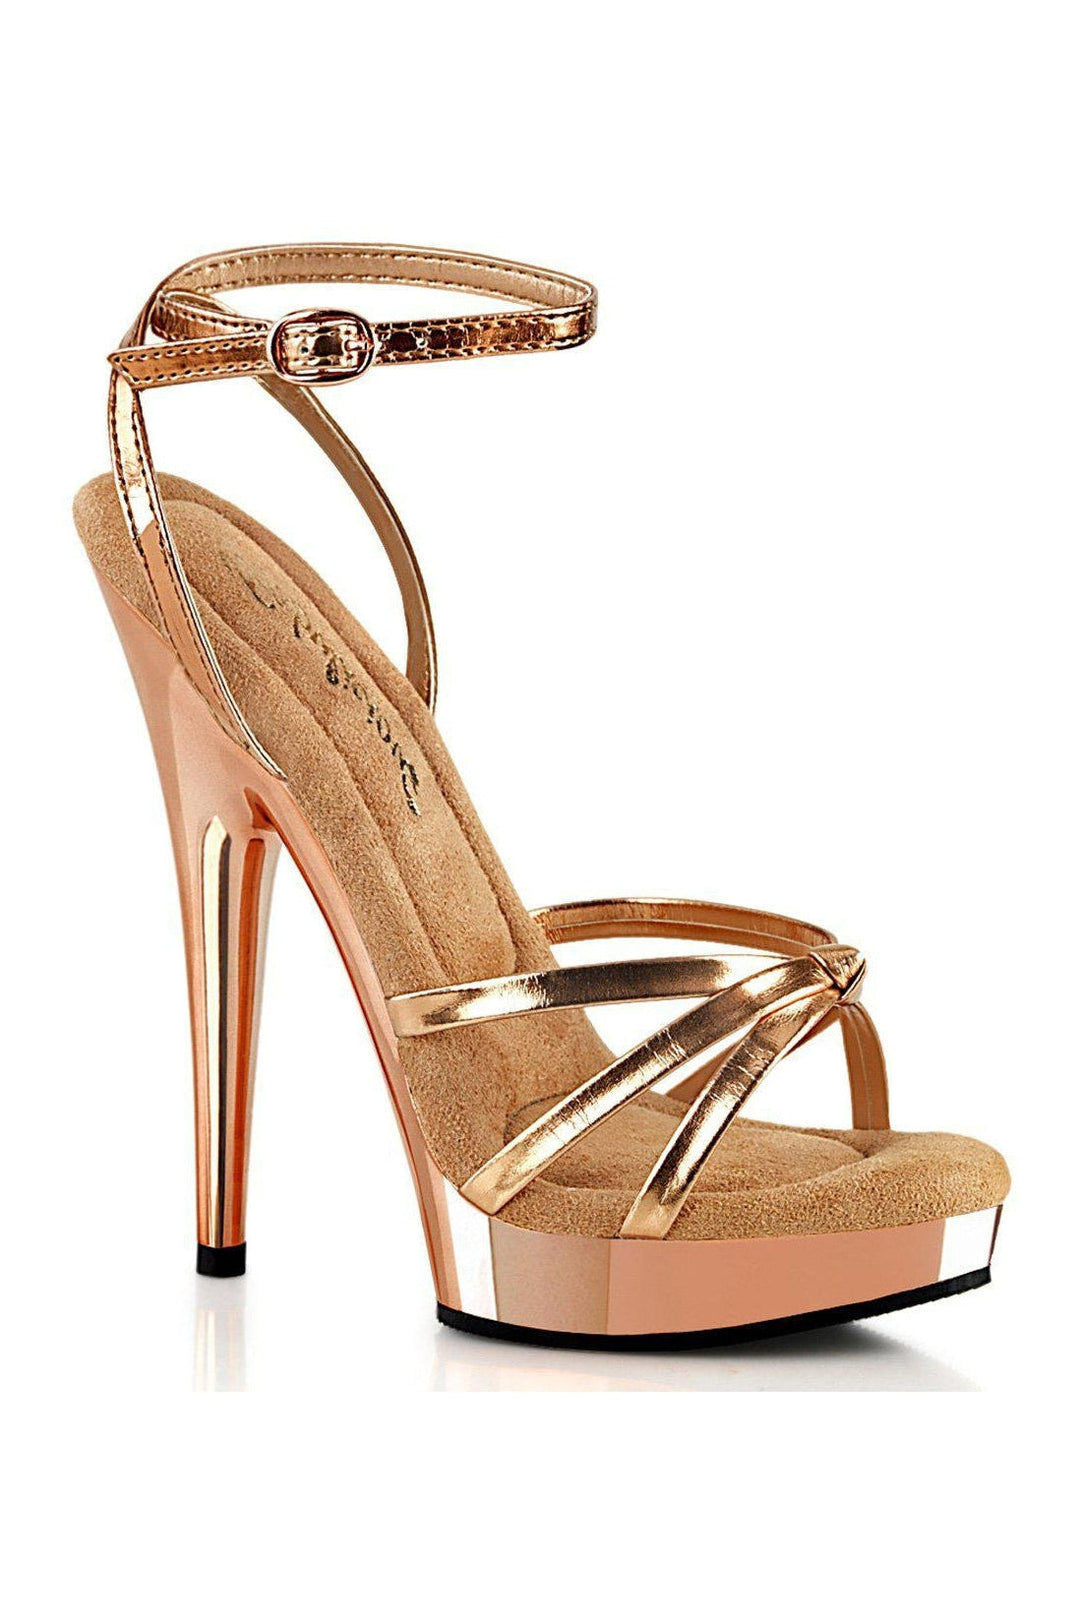 SULTRY-638 Sandal | Rose Gold Faux Leather-Sandals-Fabulicious-Rose Gold-6-Faux Leather-SEXYSHOES.COM